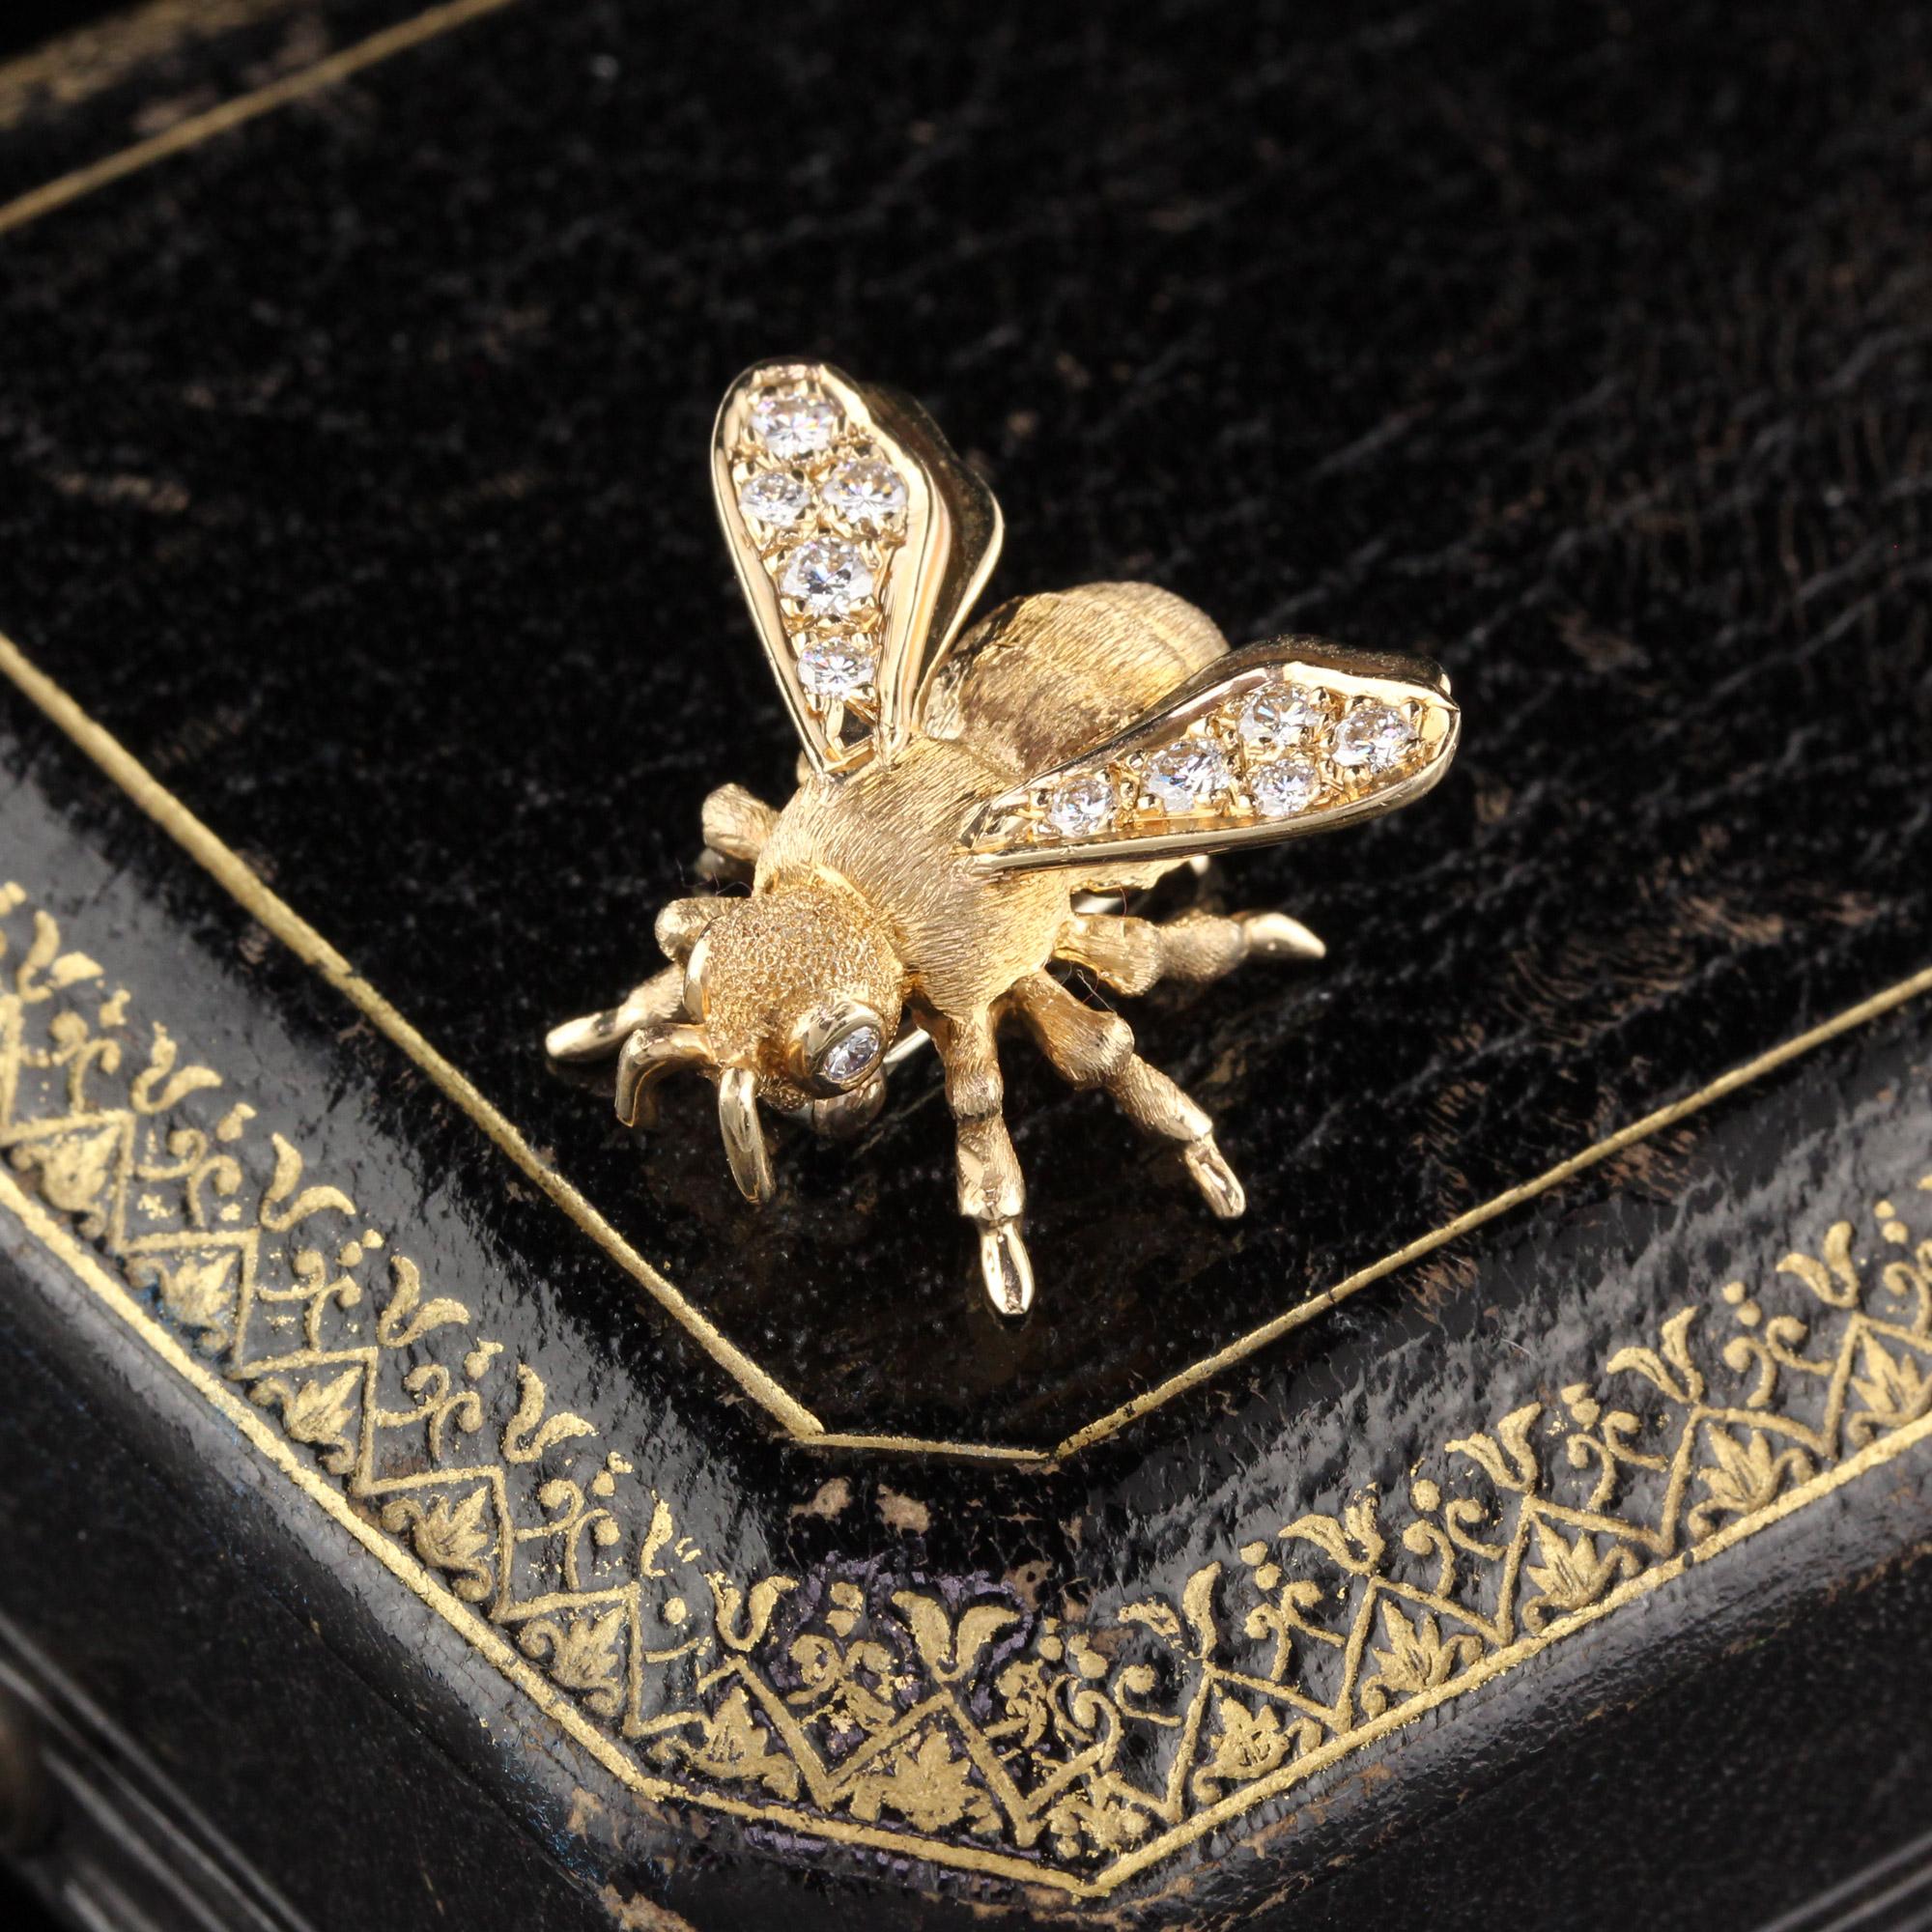 Vintage yellow gold Henry Dankner bee brooch with diamond wings & eyes. In excellent condition.

Metal: 14K Yellow Gold

Weight: 6.1 Grams

Diamond Weight: Approximately 0.25 cts 

Diamond Color: G

Diamond Clarity: VS1

Measurements: 20.57 x  21.57